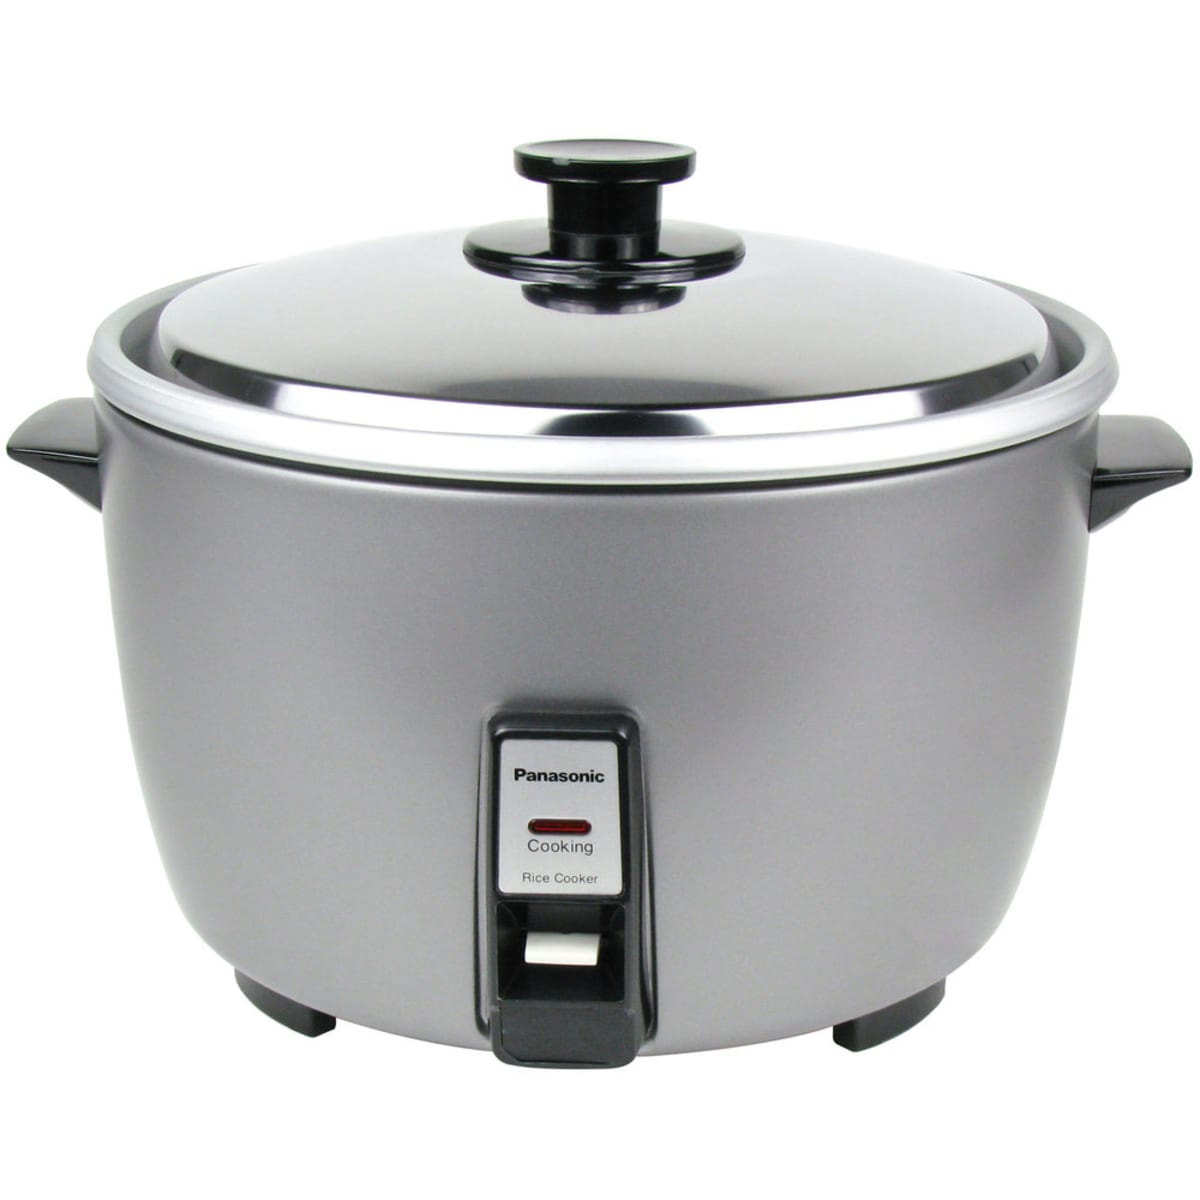  Panasonic 12 Cup (Uncooked) Automatic Rice Cooker/Steamer,  Silver: Home & Kitchen